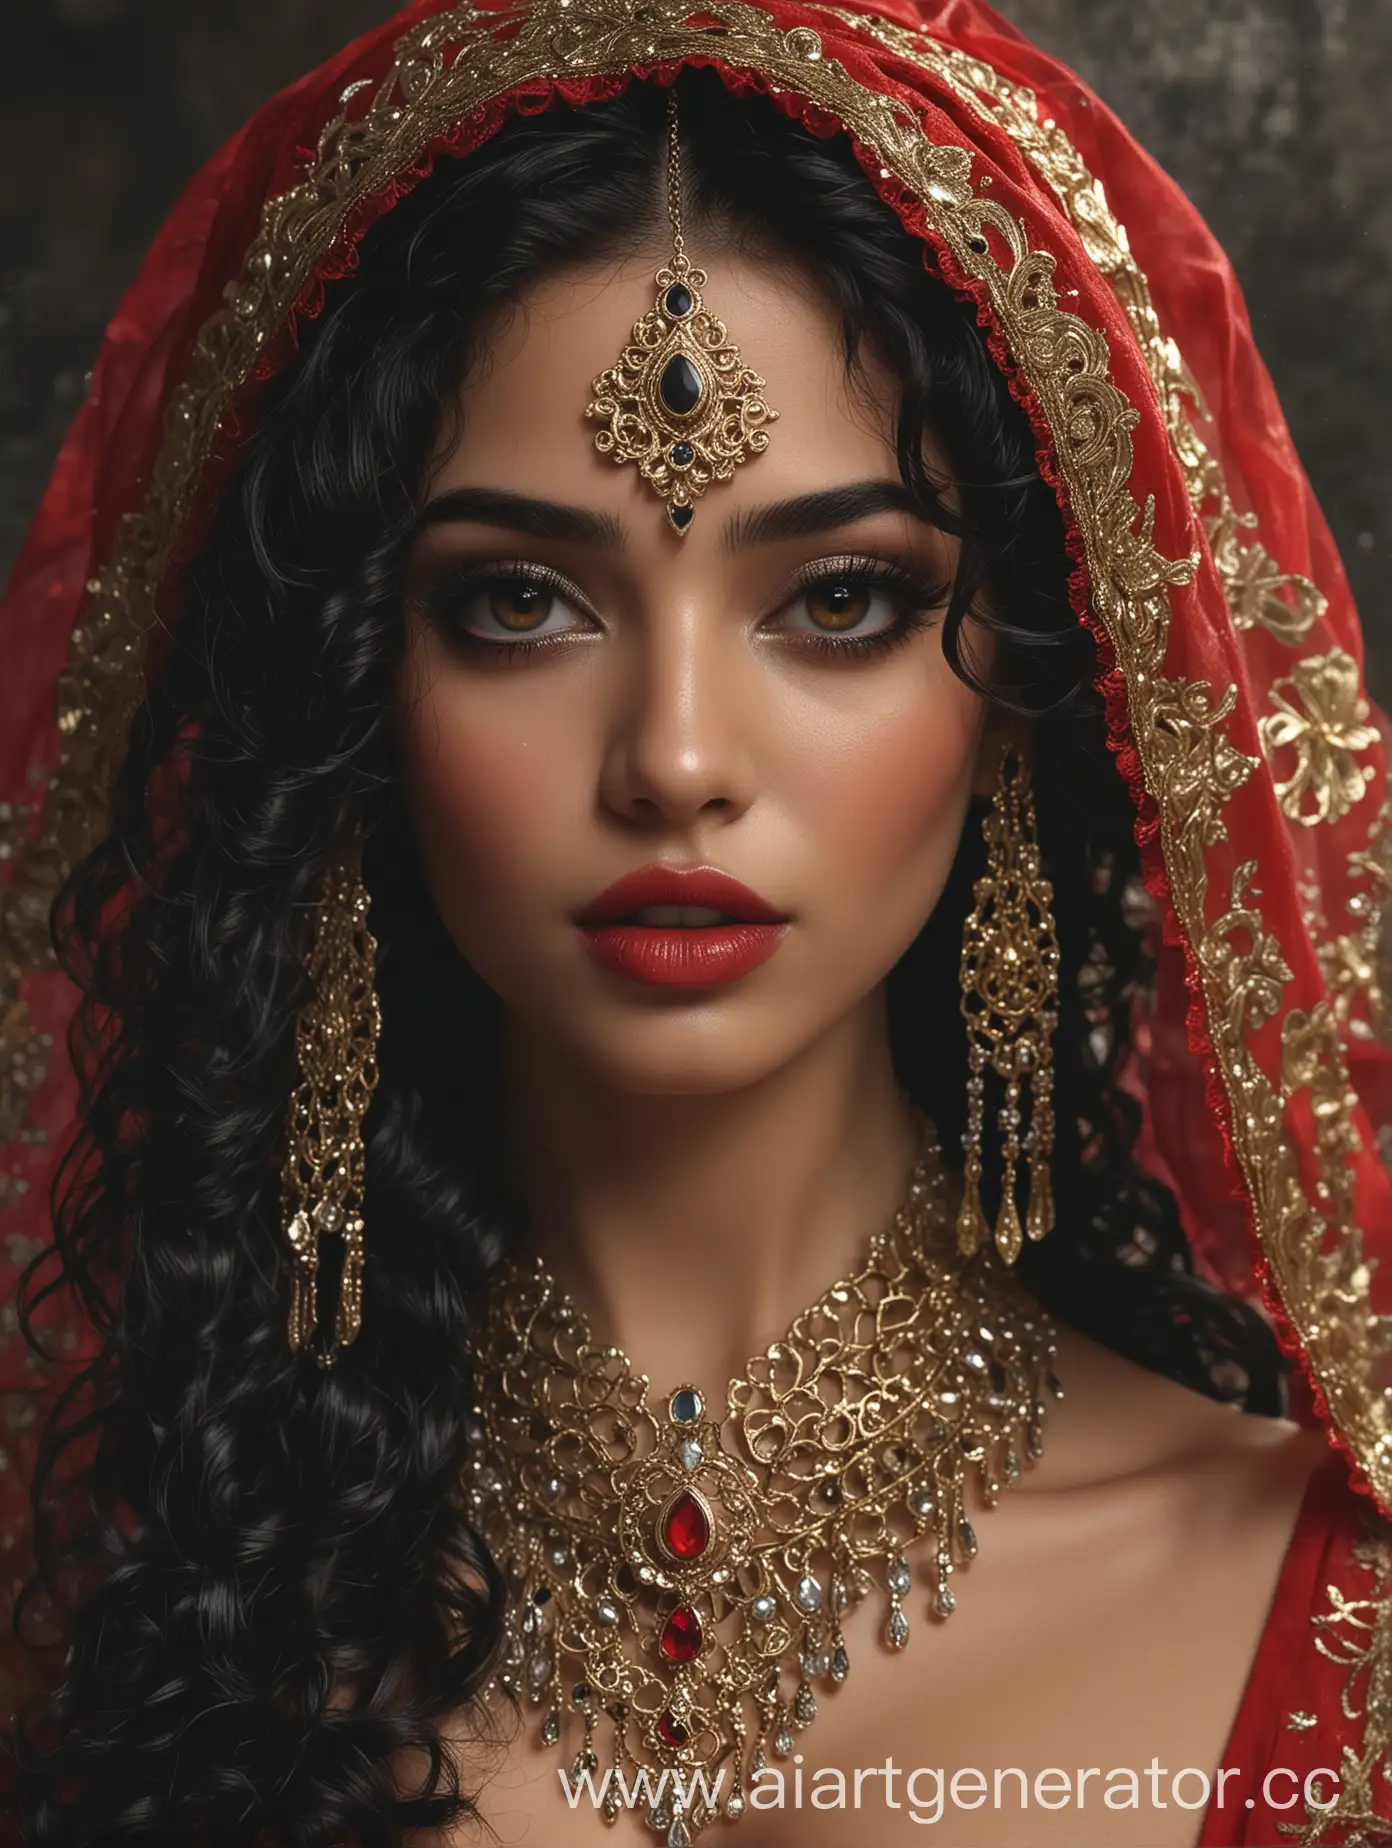 Seductive-Arab-Girl-with-Expressive-Gray-Eyes-and-Oriental-Jewelry-in-DolceGabbana-Style